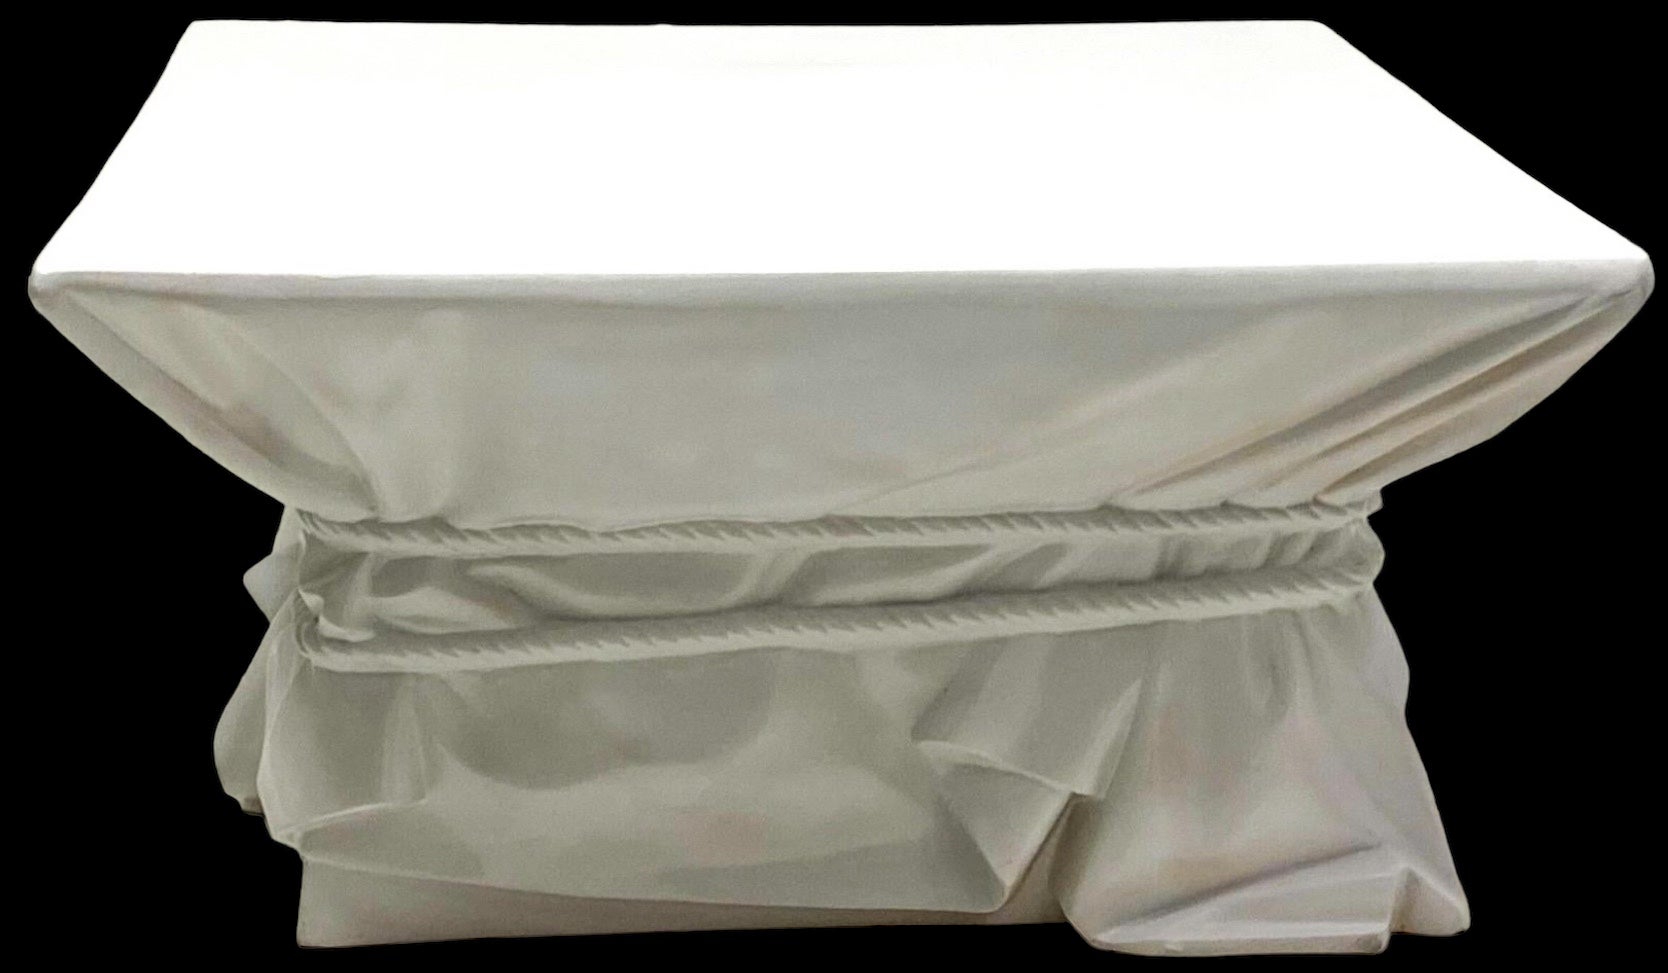 This is a mid-century modern white cast fiberglass John Dickinson style coffee table. It has the iconic faux drape and rope motif that is associated with many Dickinson pieces. It is in very good condition and unmarked.